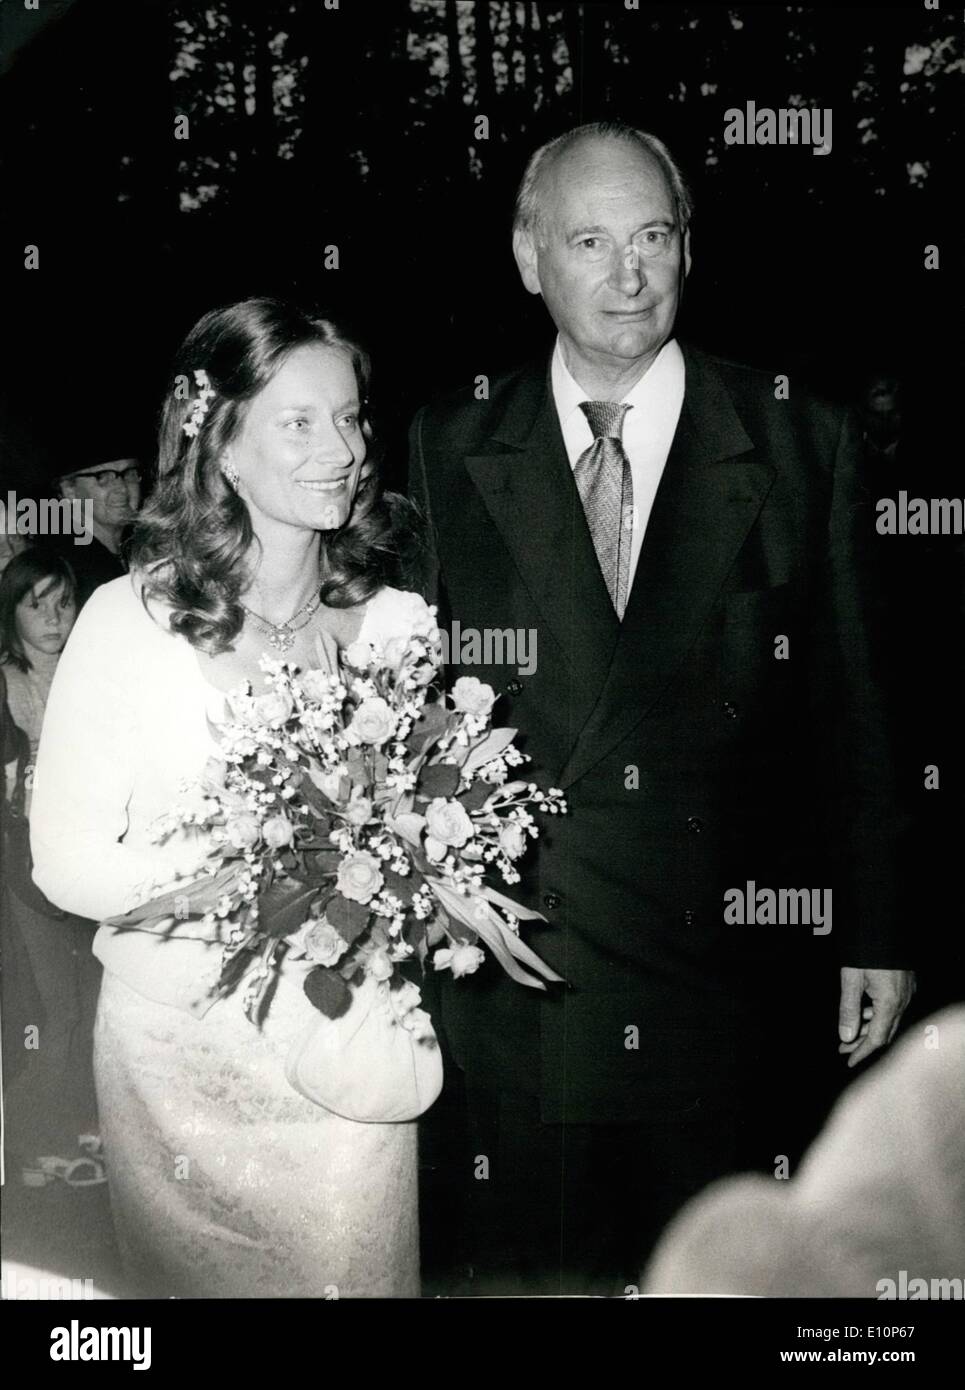 Sep. 09, 1973 - ''Prussian'' princess Kira marries American archaeologist in Bavaria: On Sept. 11, 1973 the christian wedding of Princess Kira of Hohenzollern (30) to American Thomas Liepsner (28) took place in the small village Felizenzell near Buchbach/Muhldorf. The charming princess was the last single daughter of prince Louis Ferdinand, head of the house of Hohenzollern. She is a great grandchild of German emperor Wilhelm II. Her prince consort is the son of an American manufacturer from Kansas City. ''It was not love at first sight'', confessed the happy bride Stock Photo